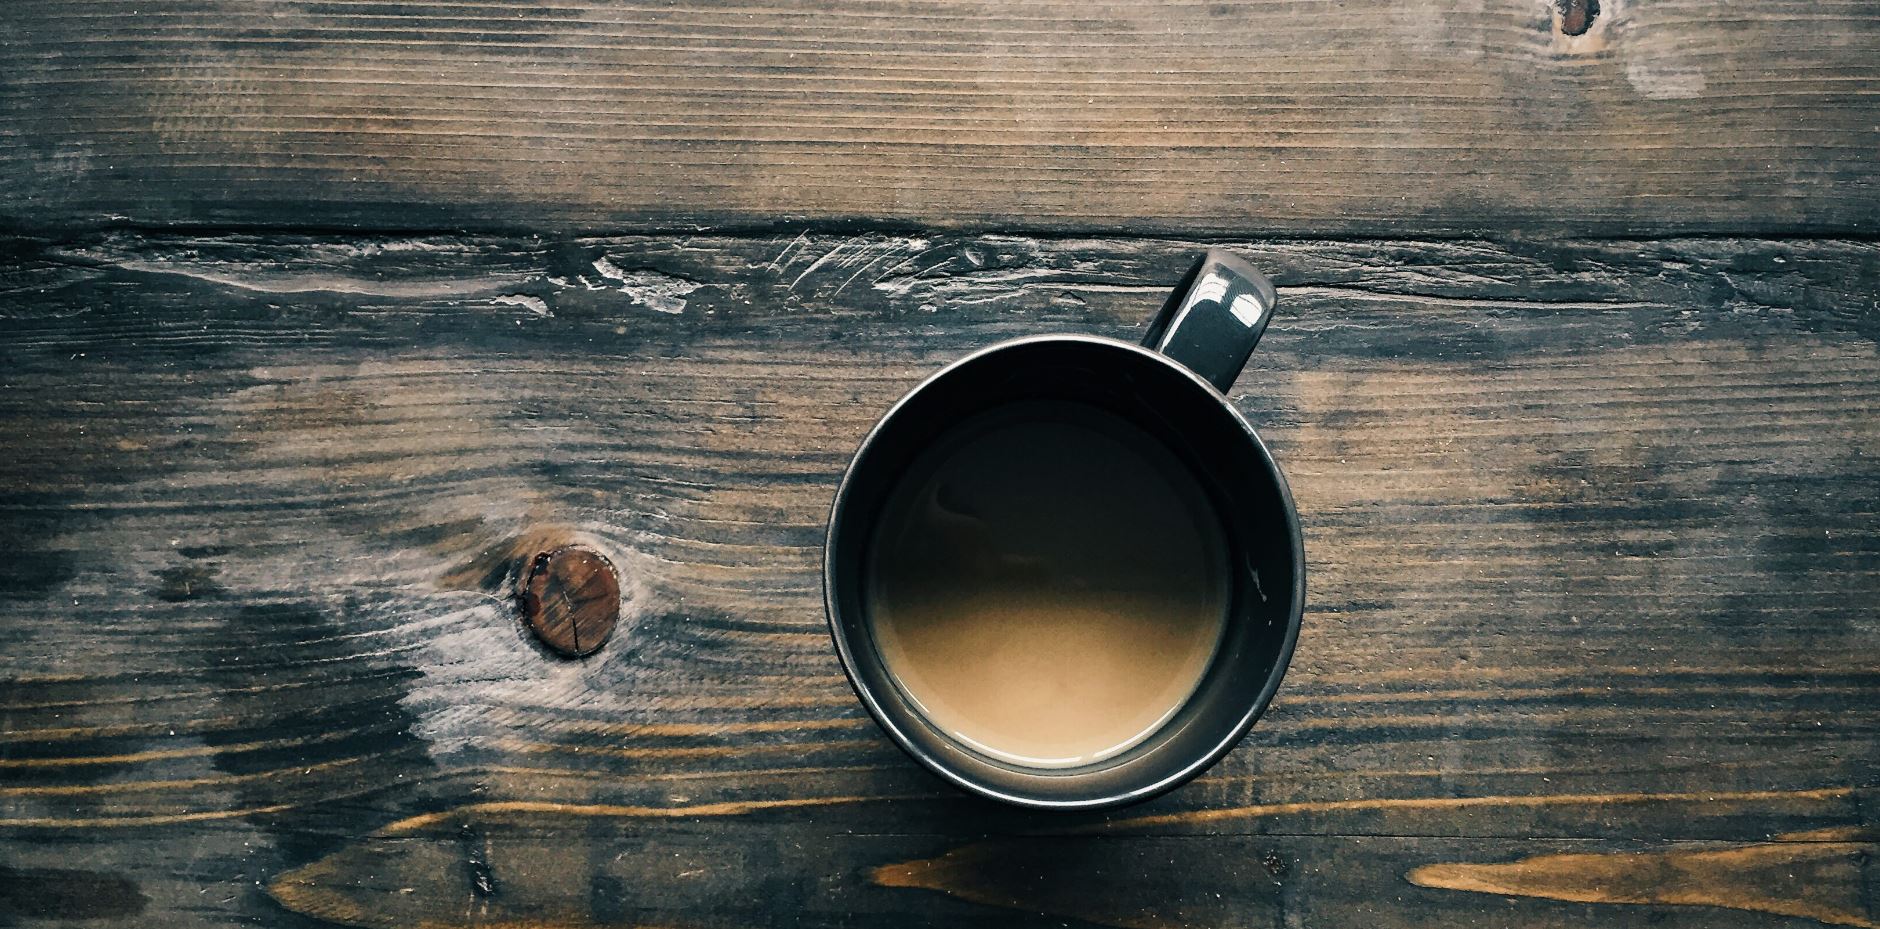 Coffee picture by Mikesh Kaos via Unsplash